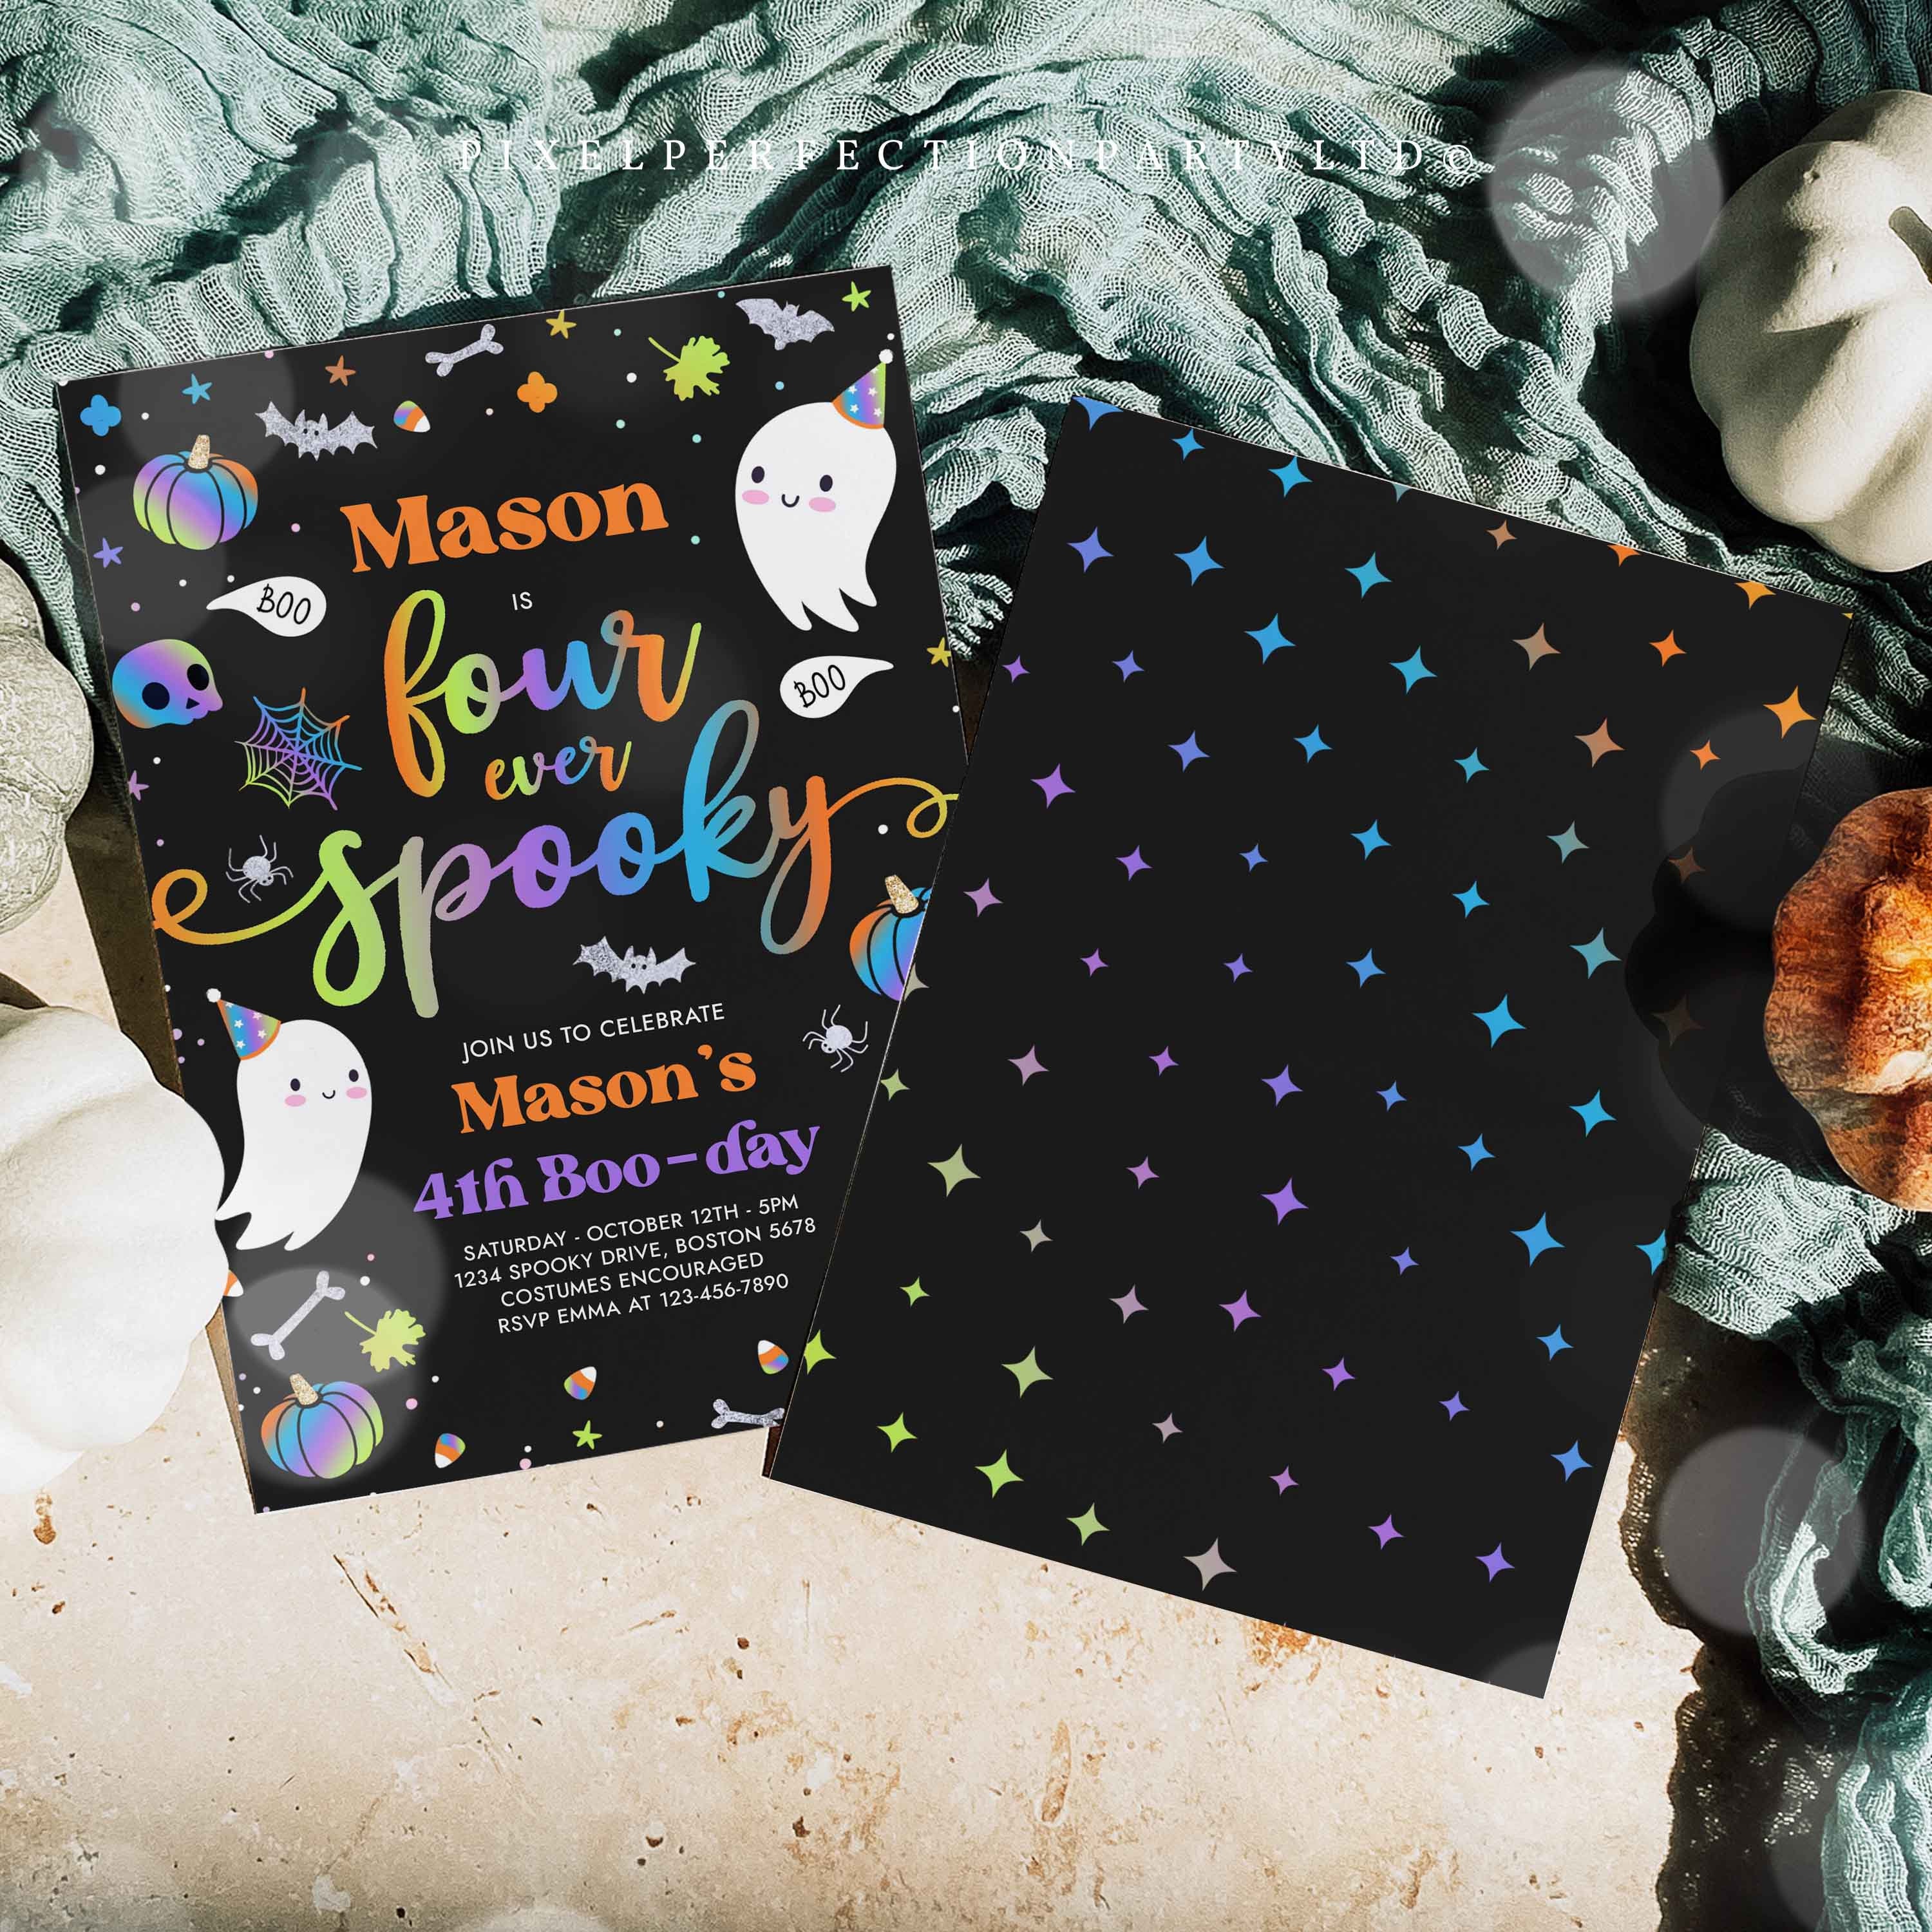 A Very Potter Halloween Party: Invitations – My Life's Designs